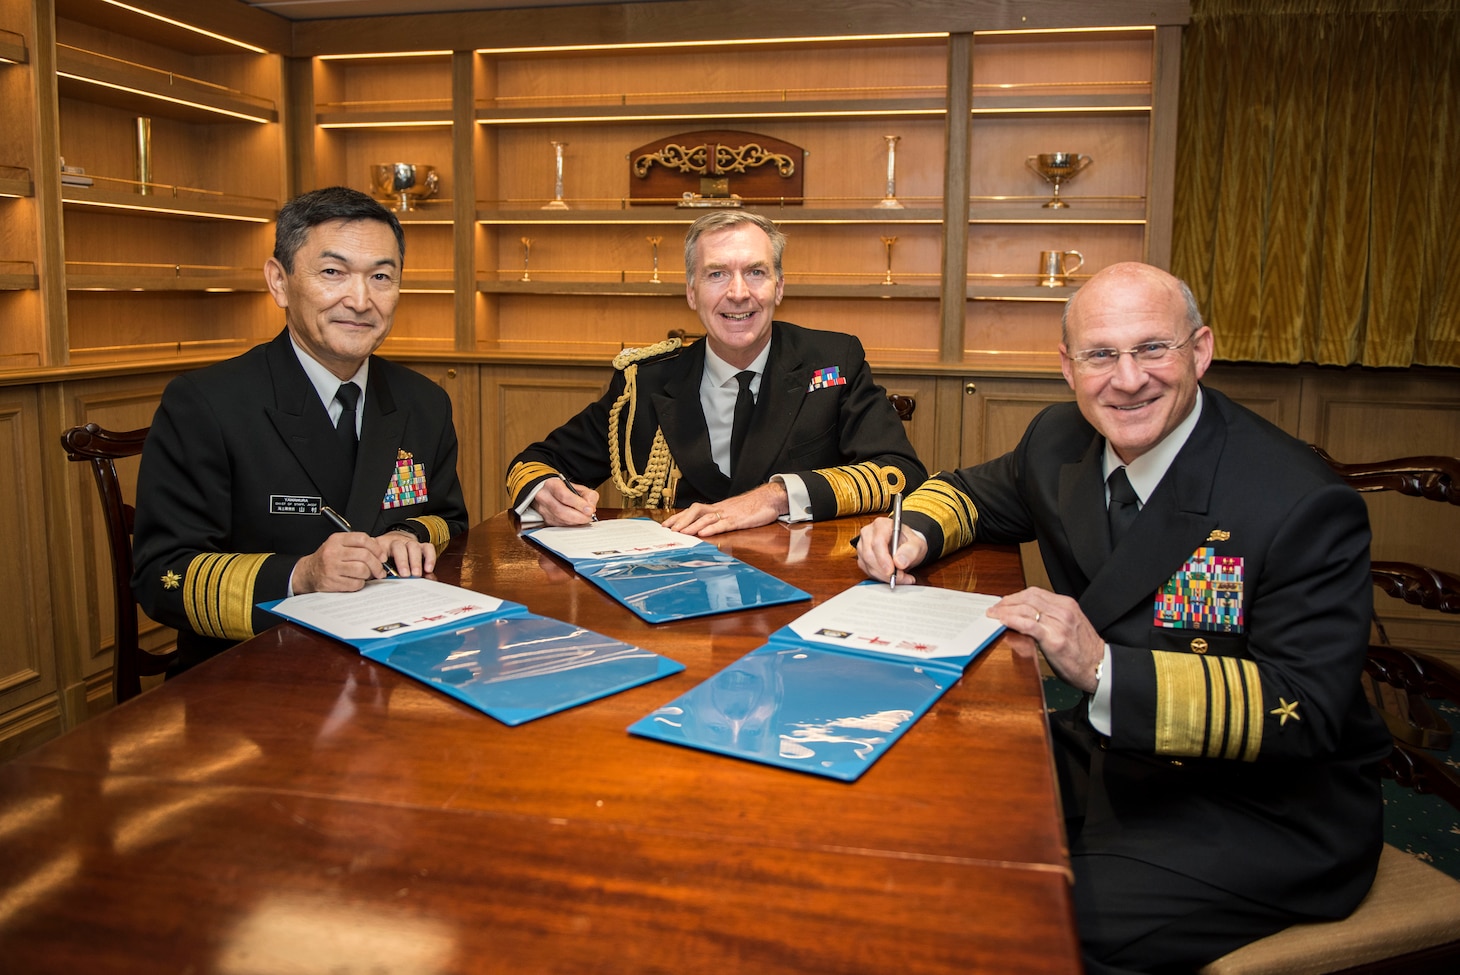 ANNAPOLIS, Md. (Nov. 20, 2019) Chief of Maritime Staff Adm. Hiroshi Yamamura, left, First Sea Lord Adm. Tony Radakin, and Chief of Naval Operations (CNO) Adm. Mike Gilday sign a Trilateral Head of Navy Joint Statement aboard the Royal Navy aircraft carrier HMS Queen Elizabeth (R08). The trilateral cooperation agreement reaffirms the three countries’ commitment to increased collaboration and cooperation.